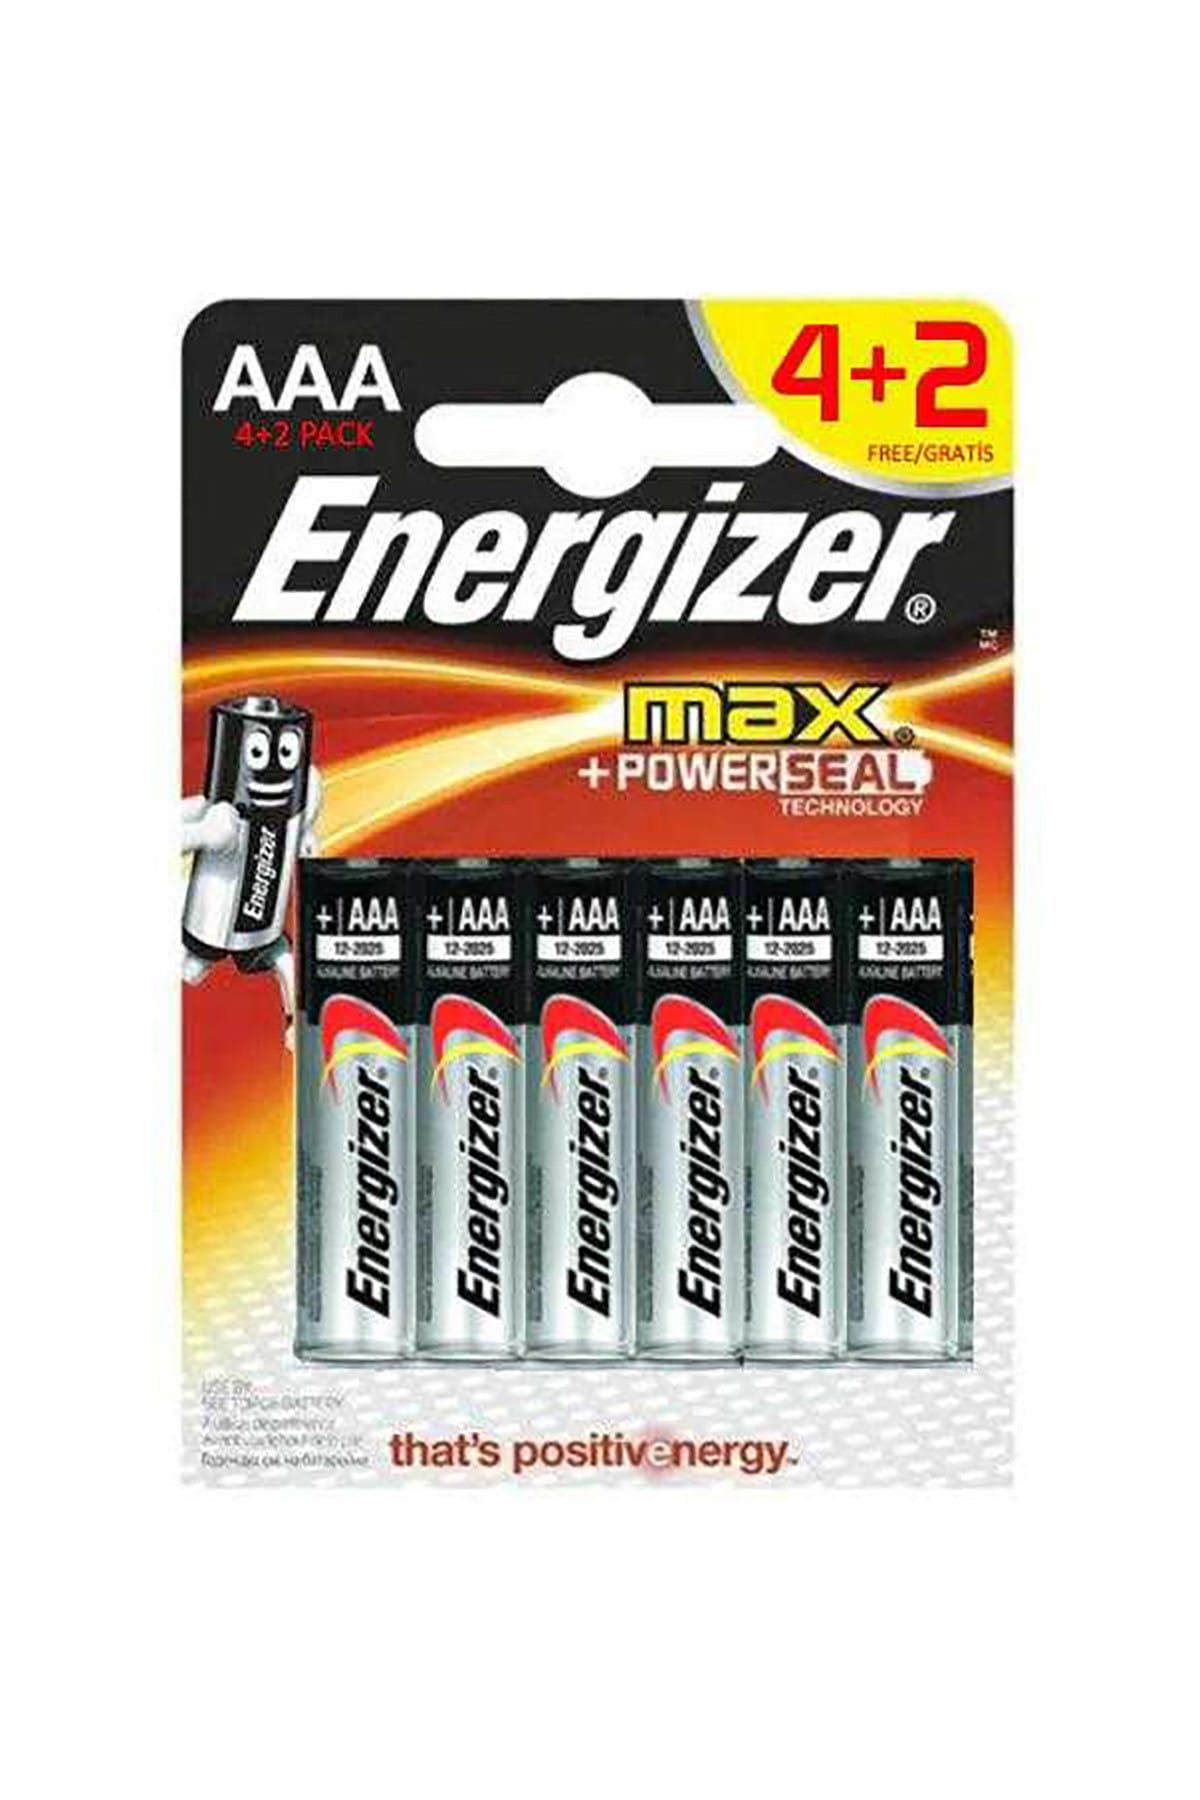 Energizer Alkaline Max Power Seal 4+2 AAA İnce Pil